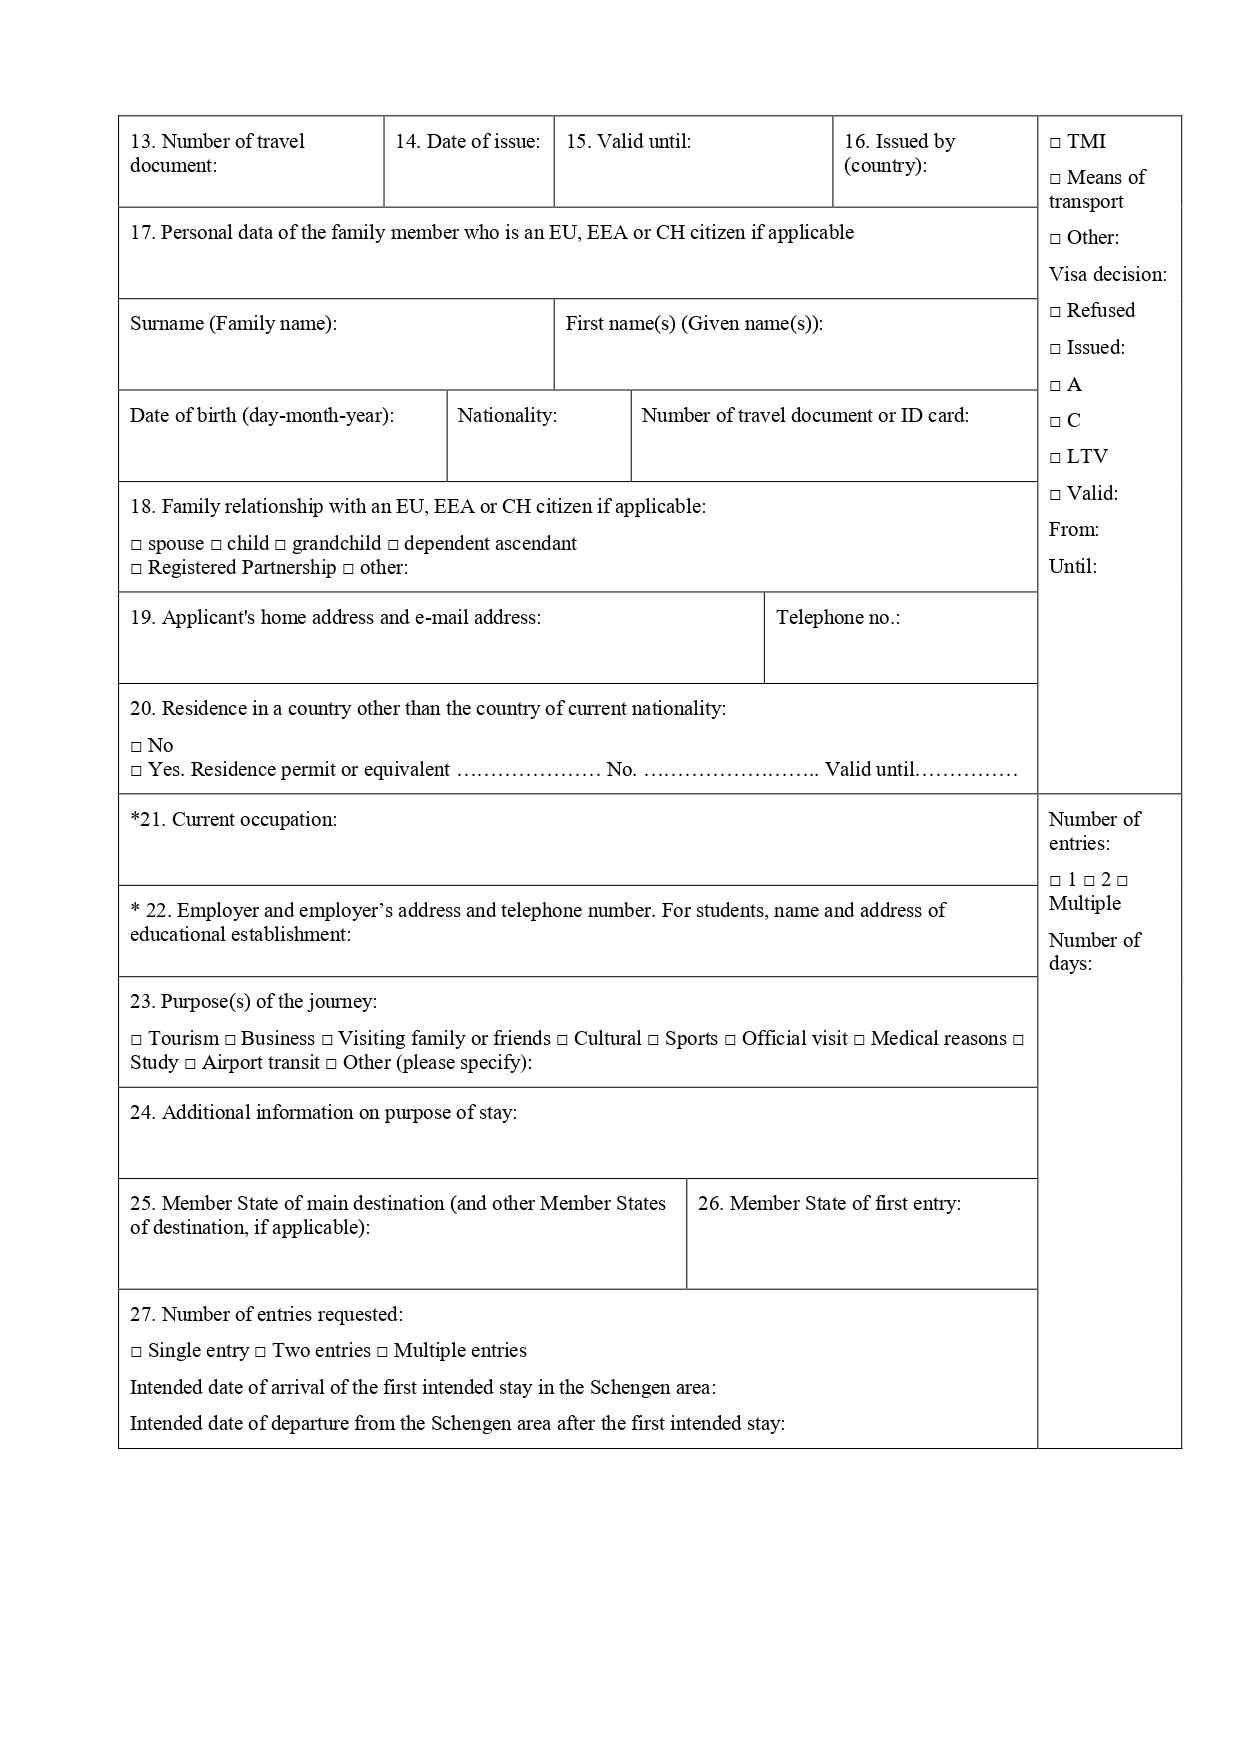 Page 2 of the Schengen visa application form.